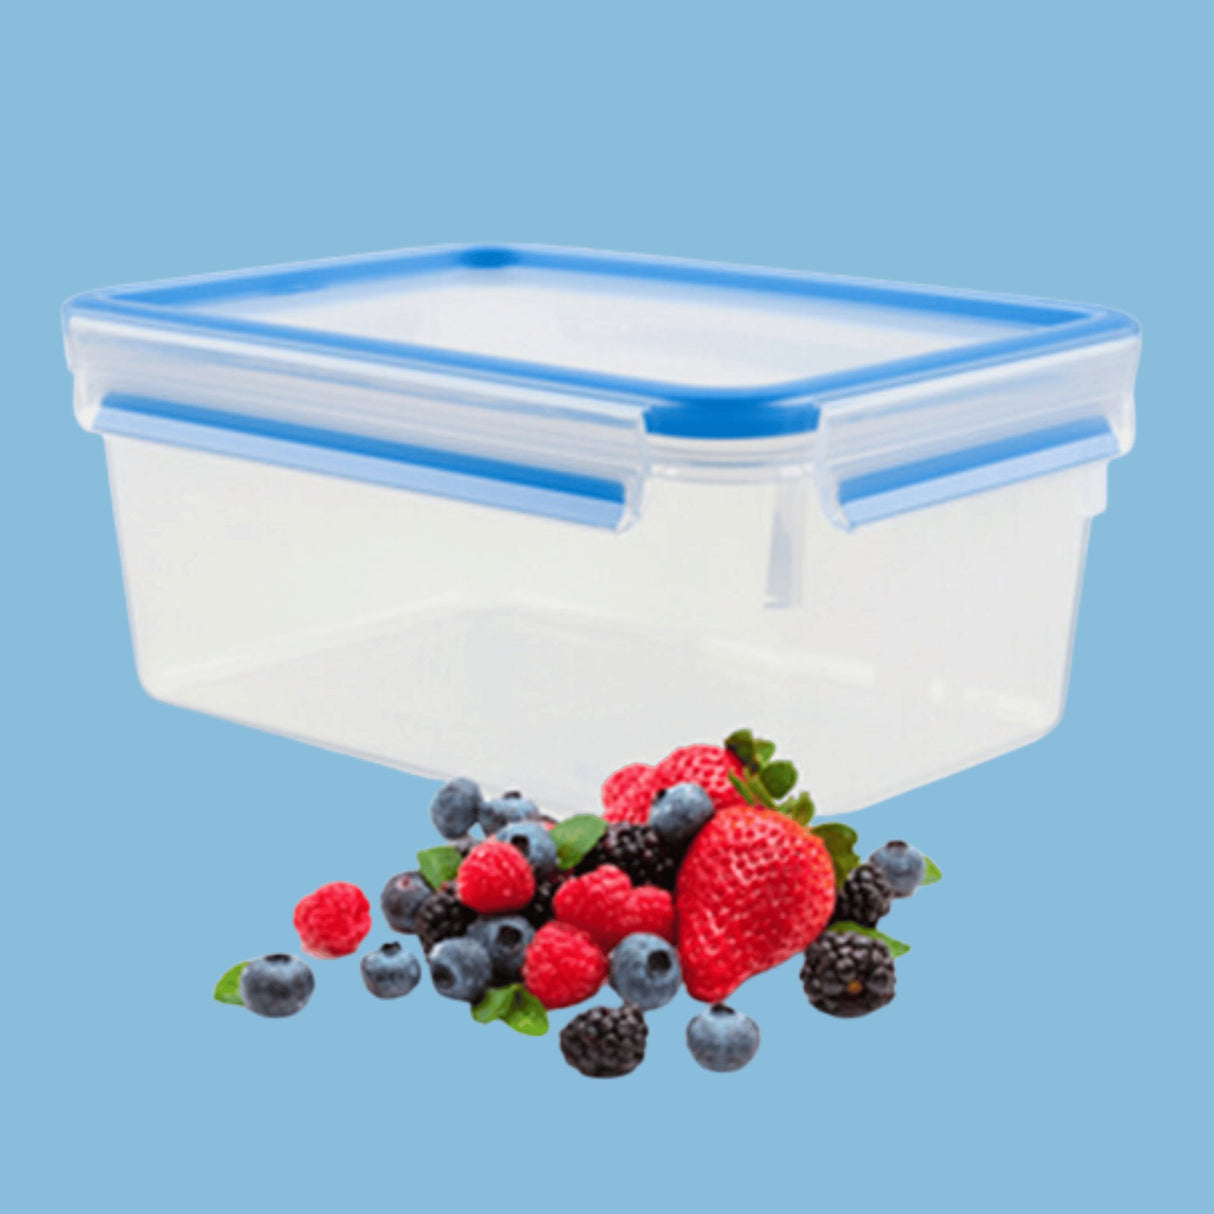 Tefal 3.7L Square Masterseal Plastic Food Container K3022012 - KWT Tech Mart